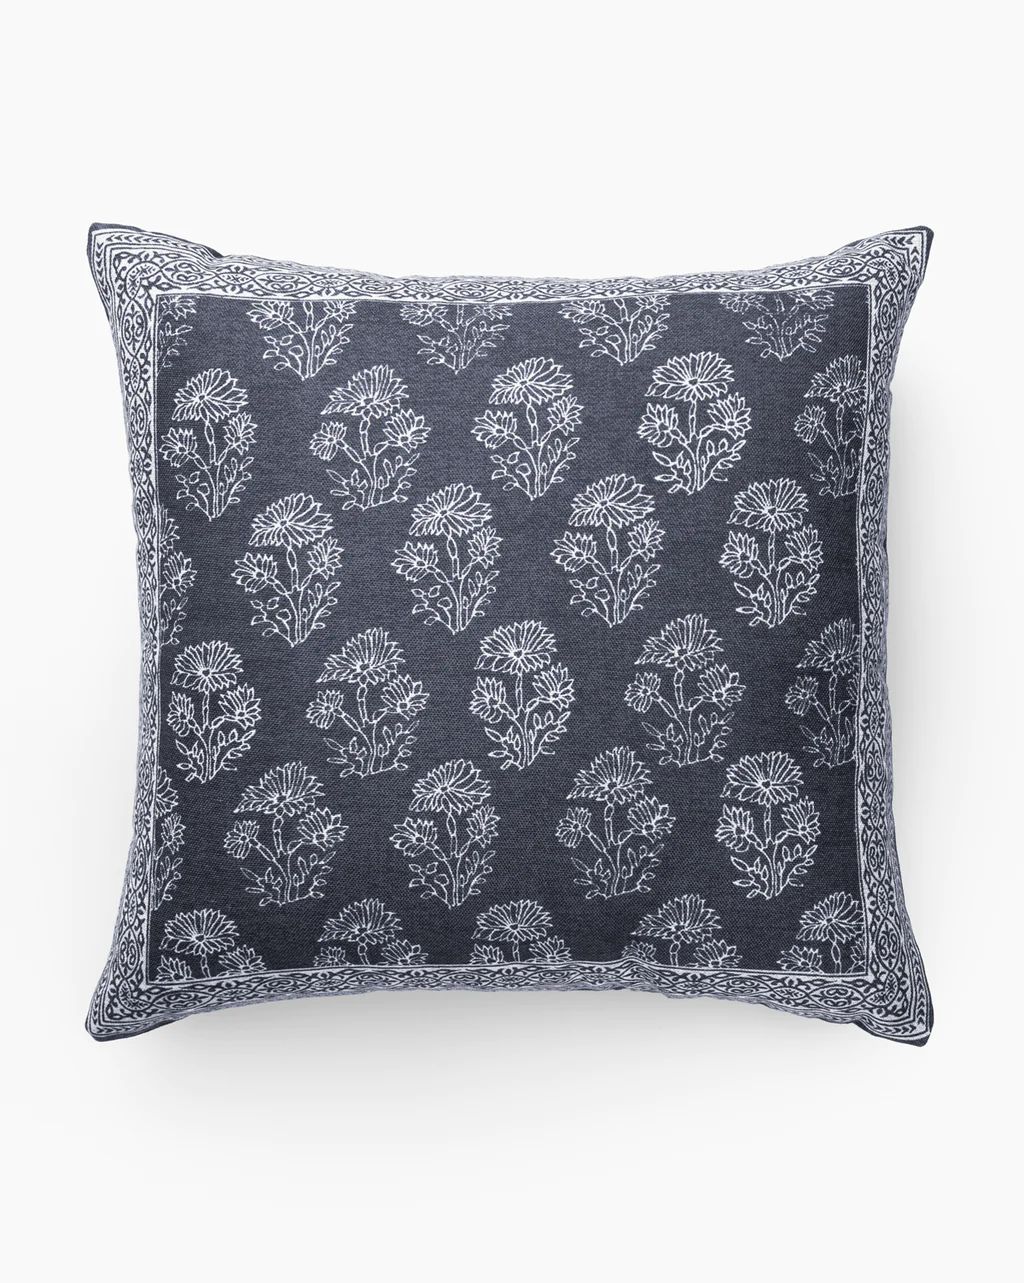 Emmy Indoor/Outdoor Pillow | McGee & Co.